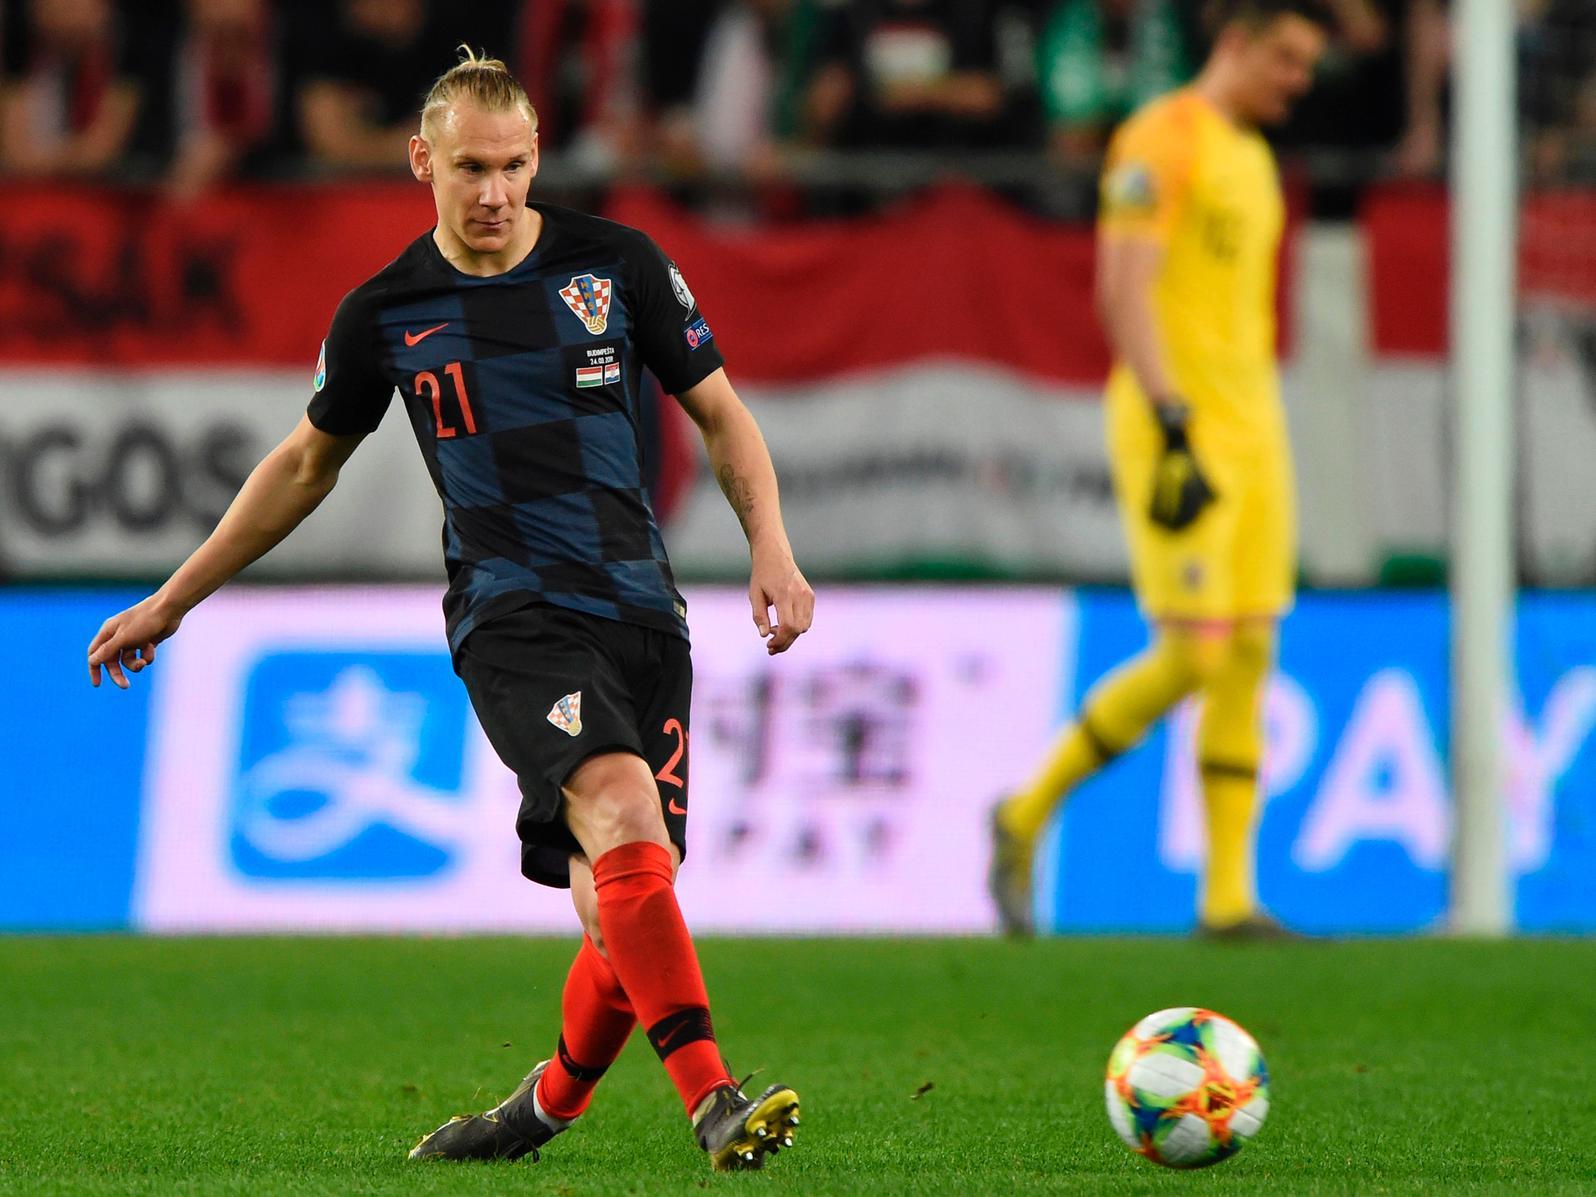 Sheffield United have been linked with a shock move for Croatian World Cup finalist and Besiktas star defender Domagoj Vida. (Takvim)